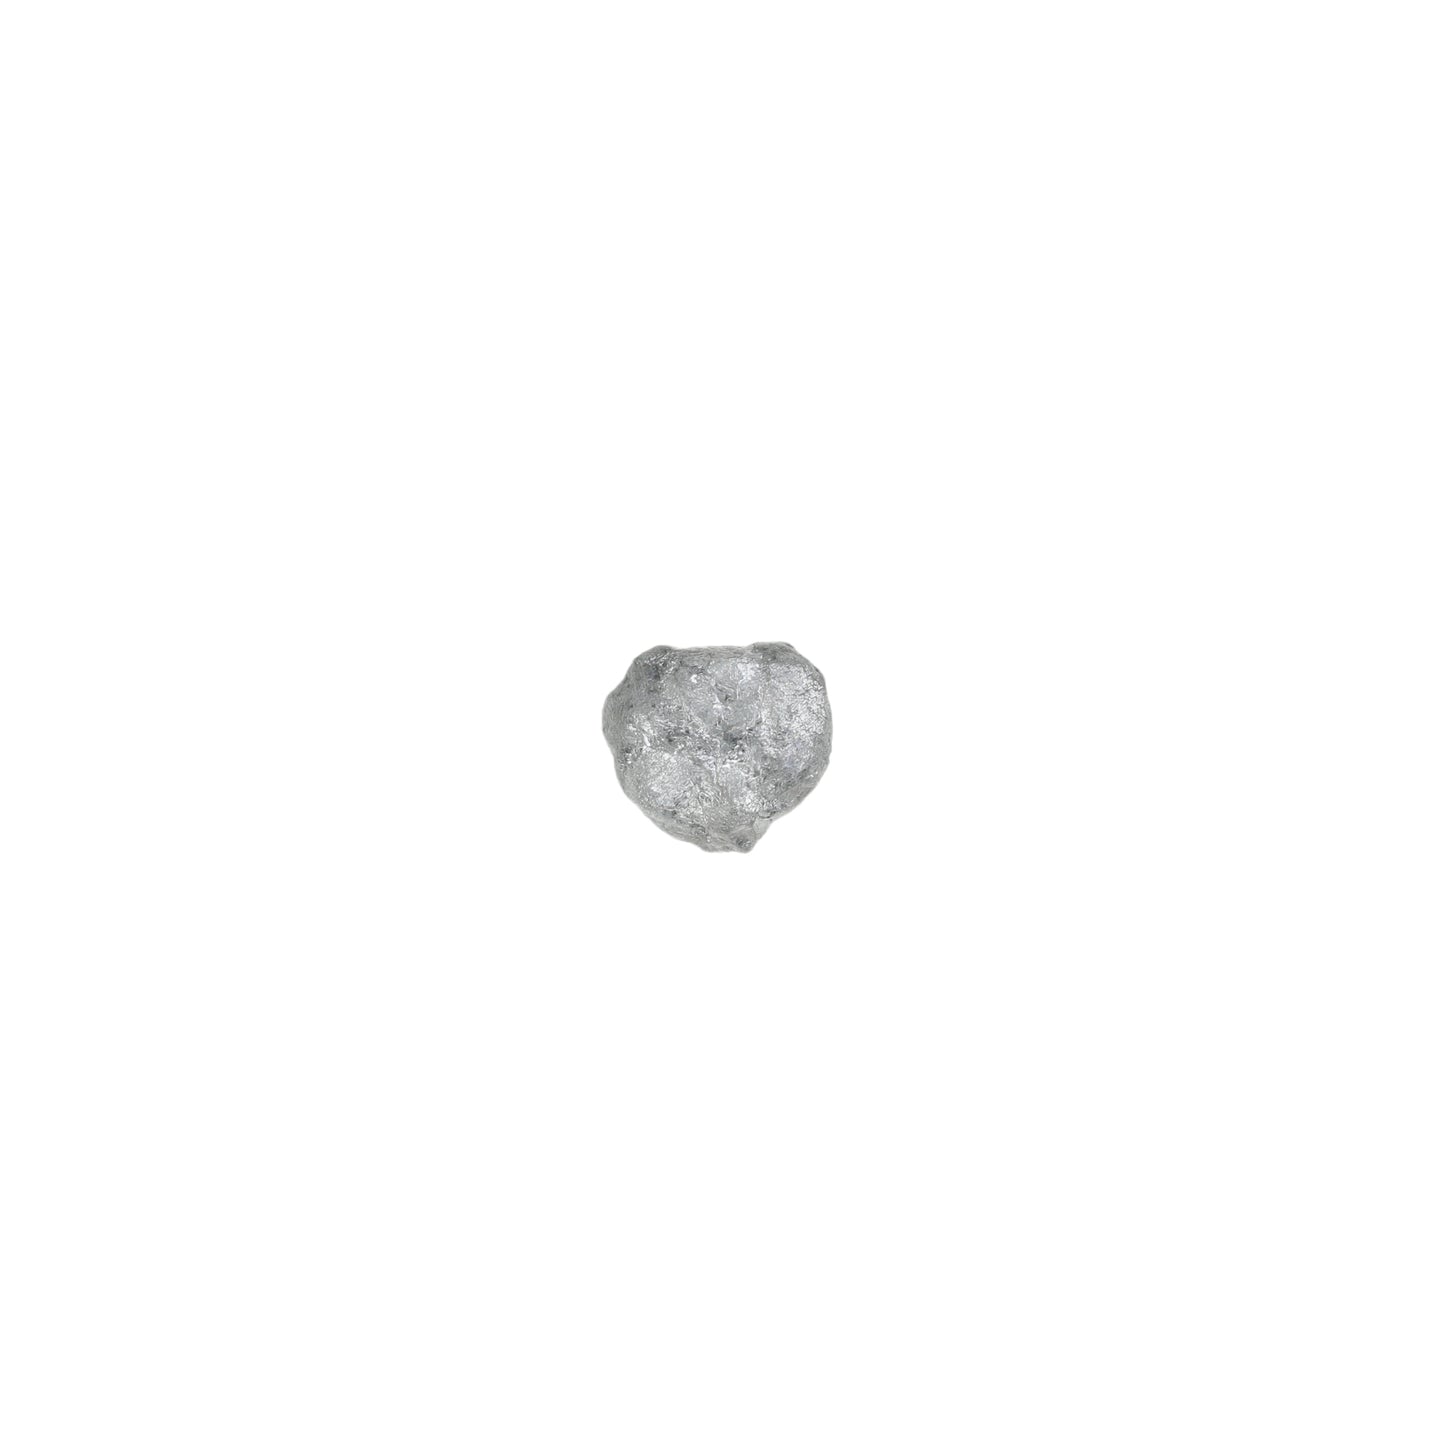 1.7 CT Fancy Salt And Pepper Rough Uncut Diamond For Proposal Ring | Gift For Girl Friend | Gift For Wife